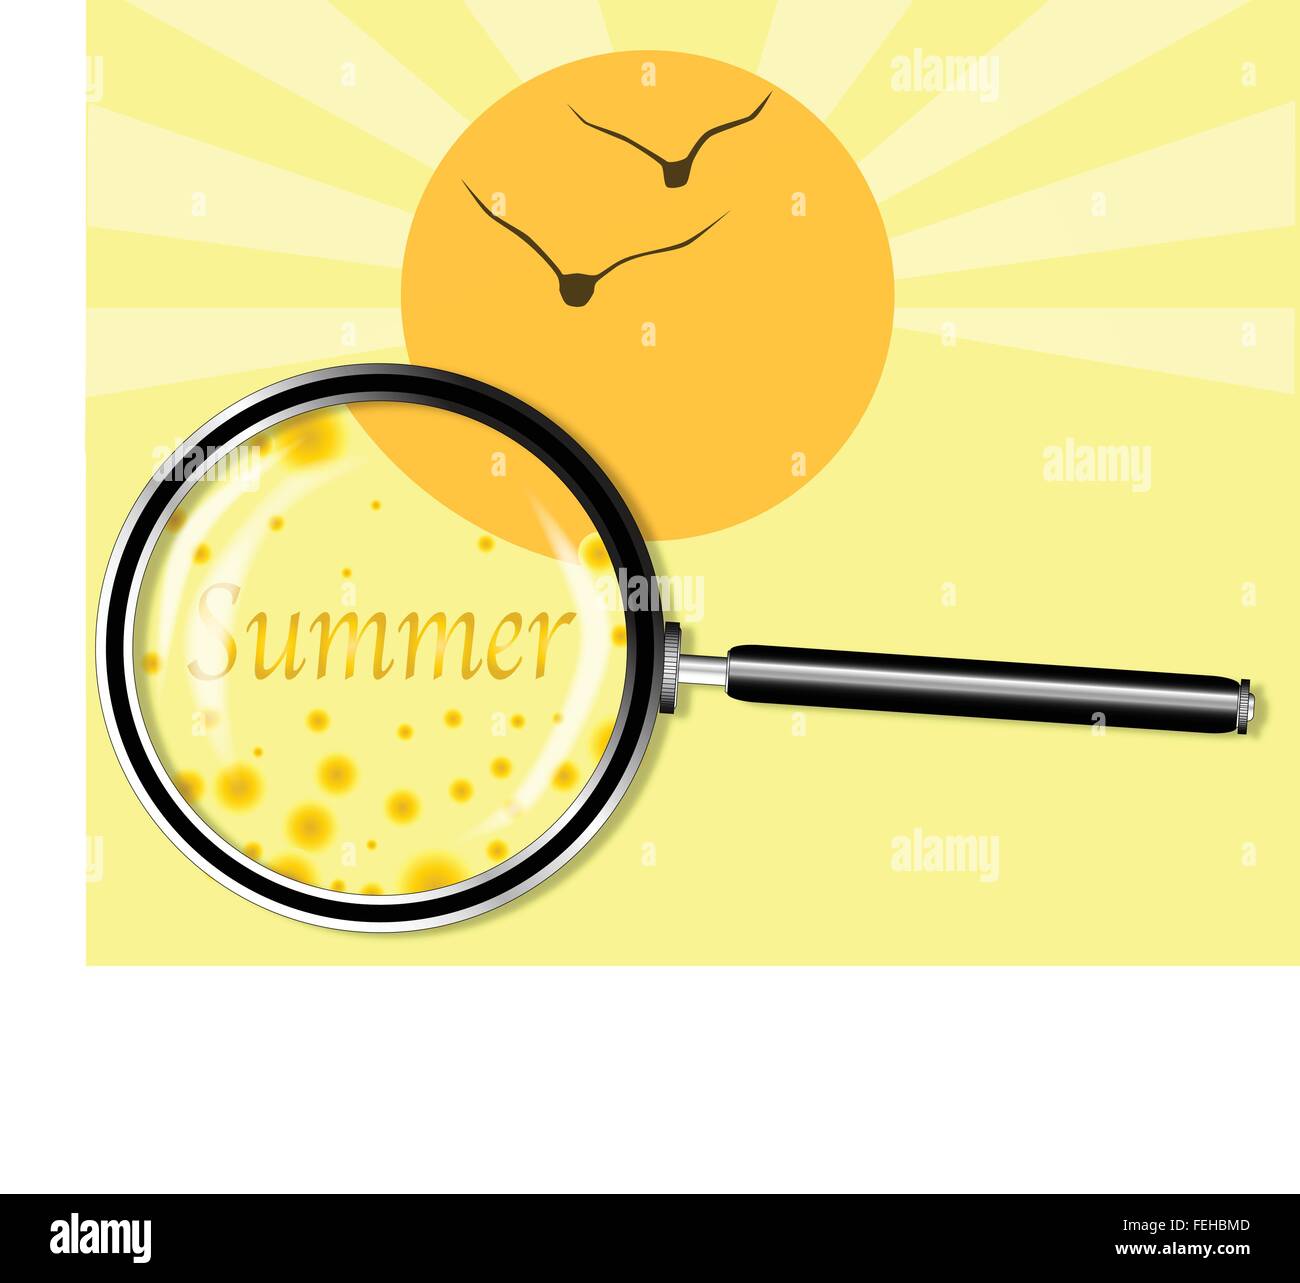 A depiction of Summer with a bright yellow and floating abstract balls below a magnifying glass Stock Vector